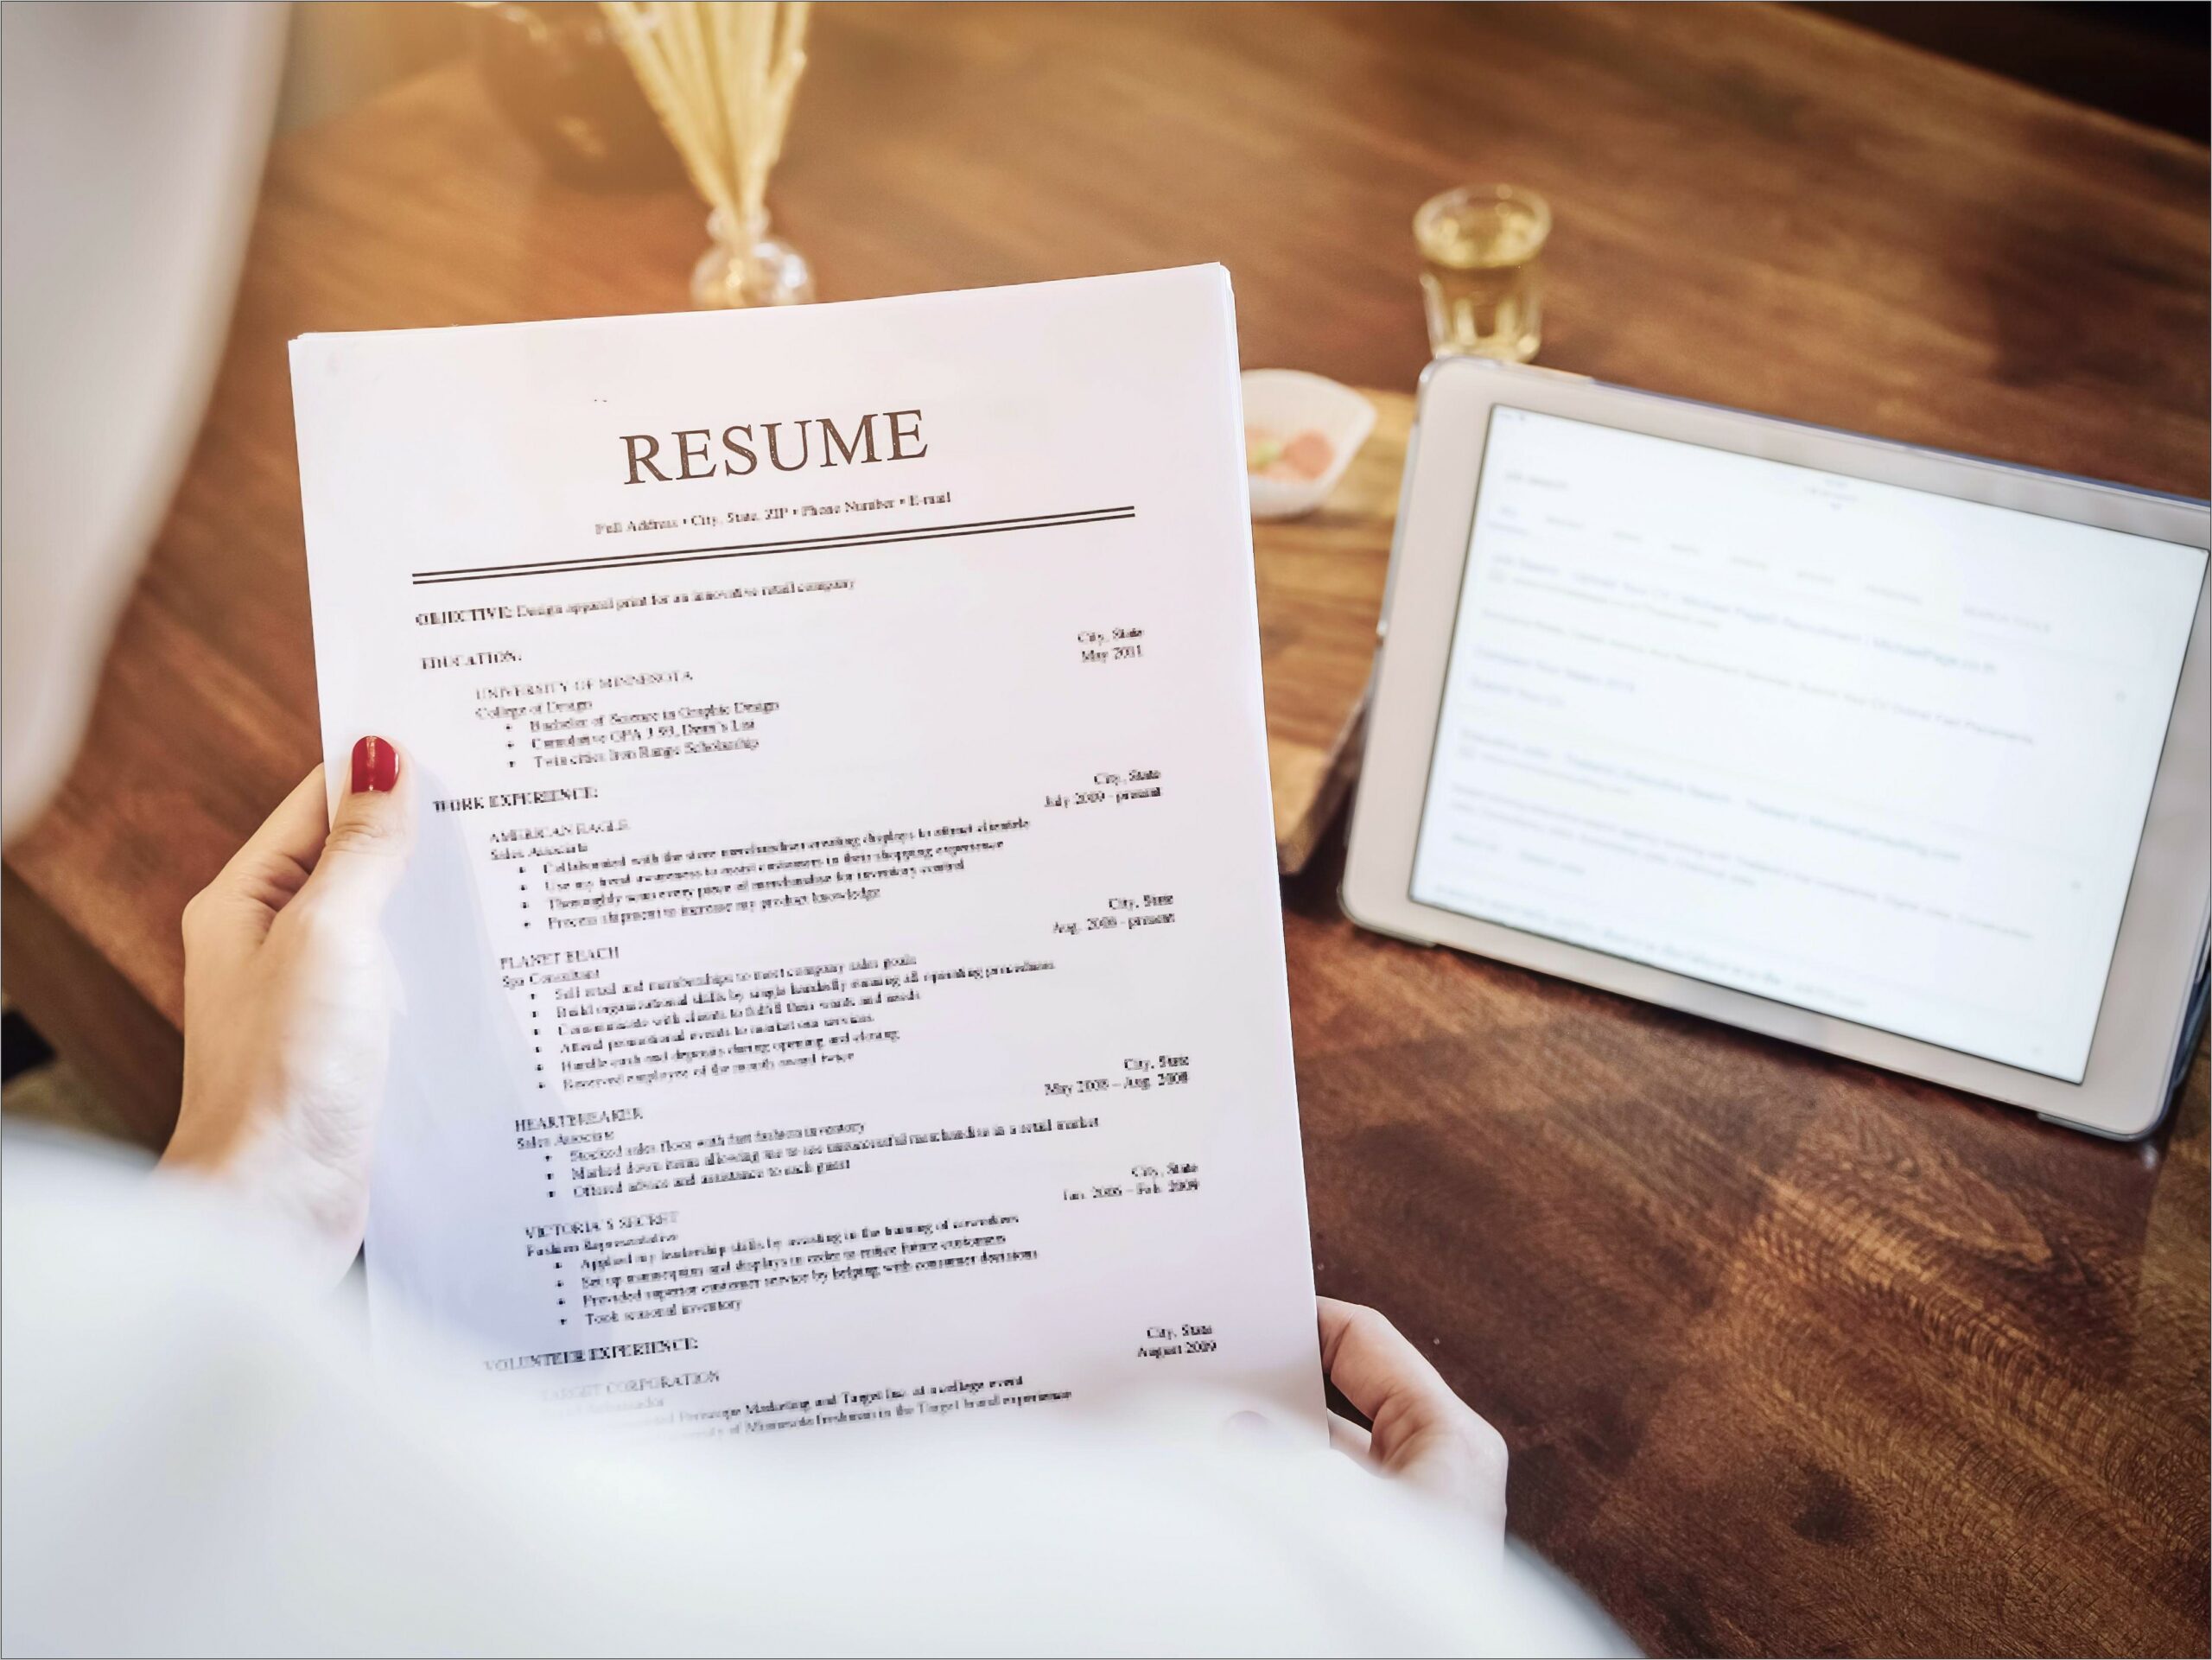 Putting A Website On A Resume